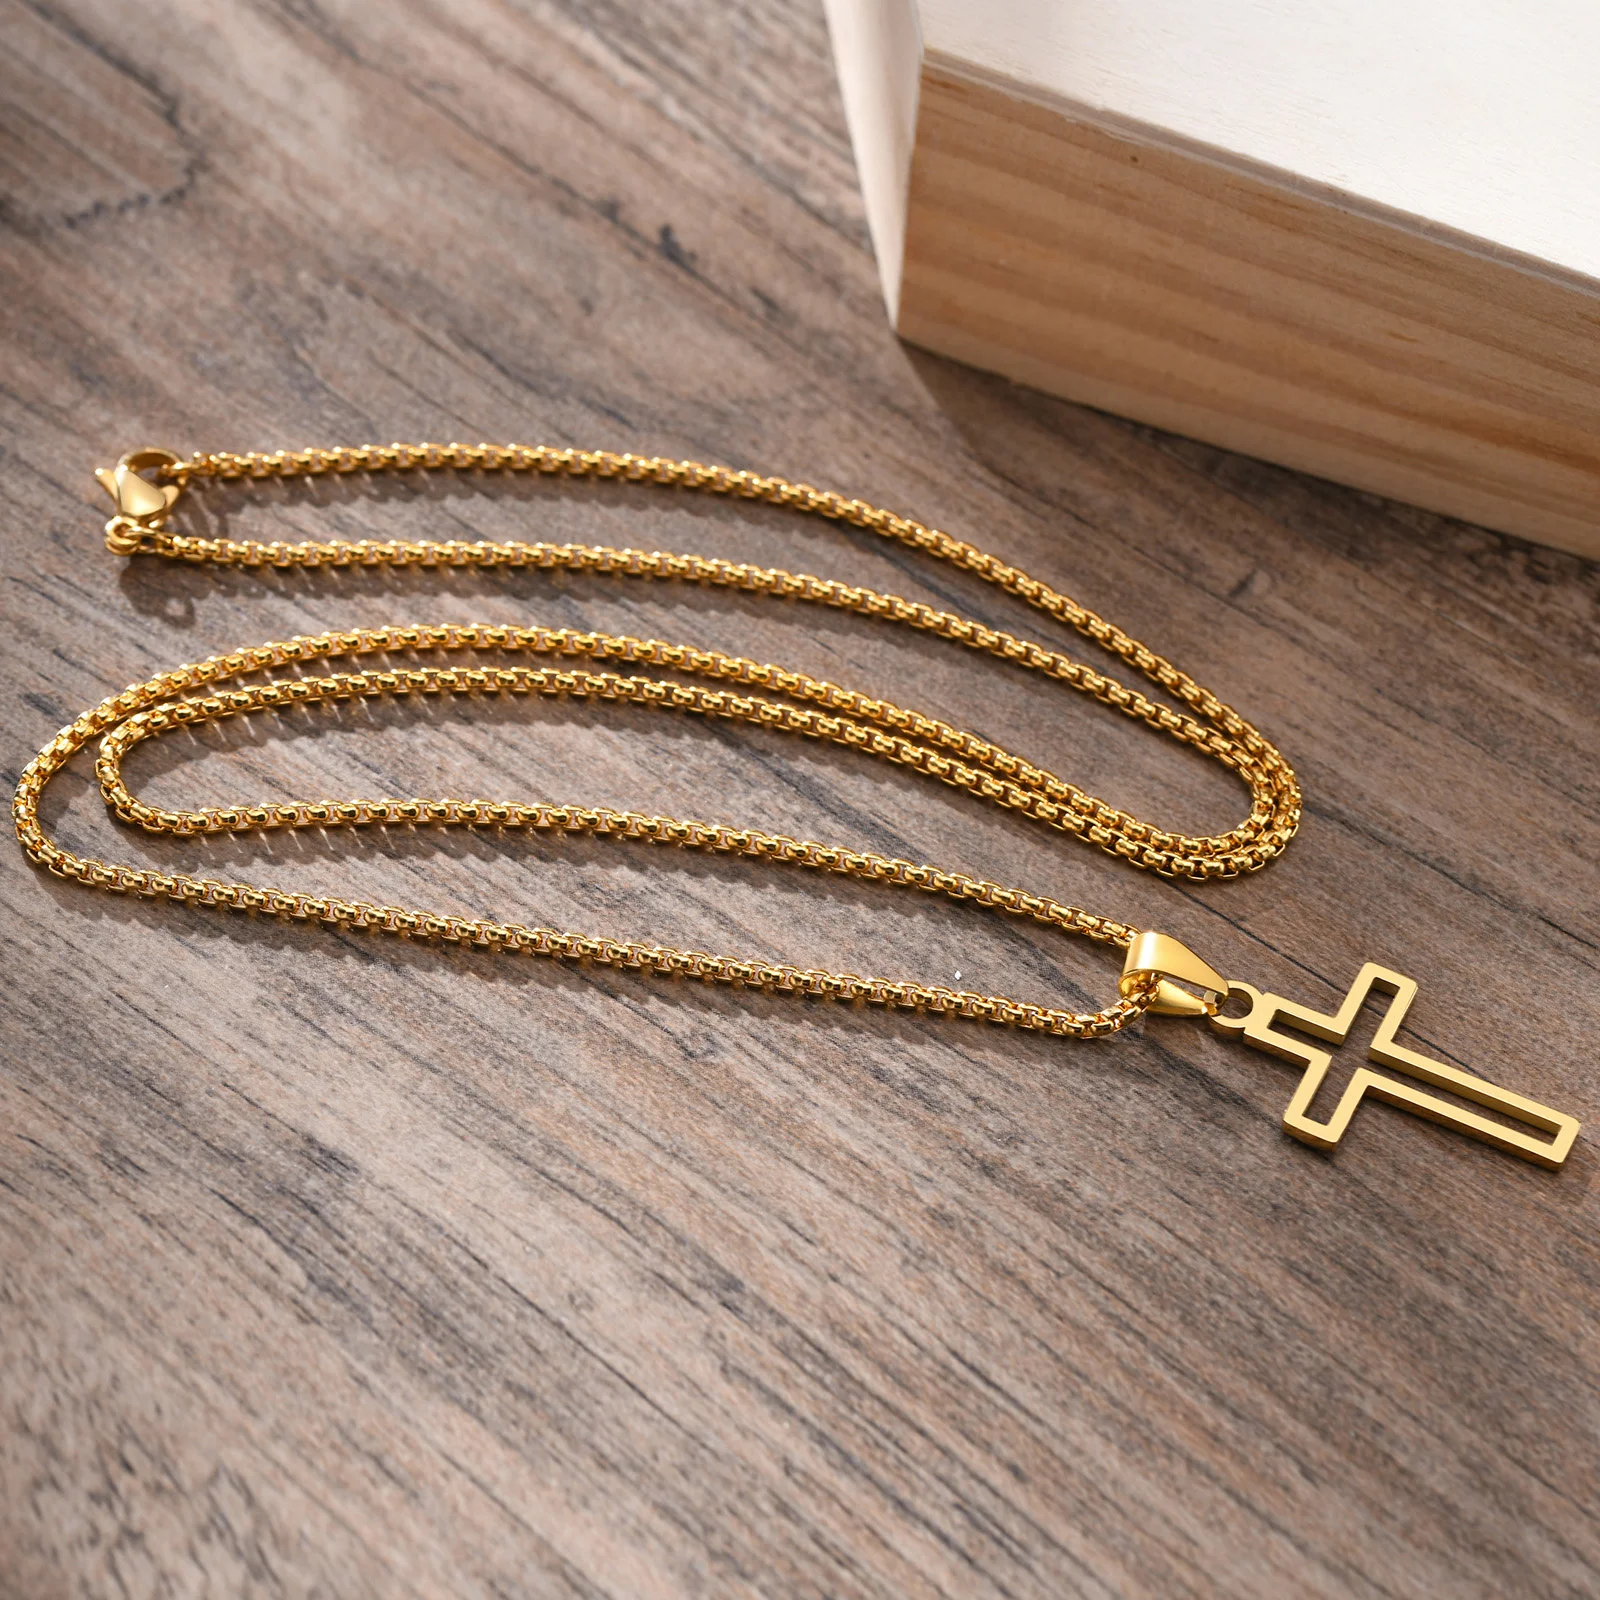 

Vnox Cutout Cross Necklace for Men Women, Stainless Steel Hollow Cross Pendant with 24" Box Chain, Religious Faith Christ Collar